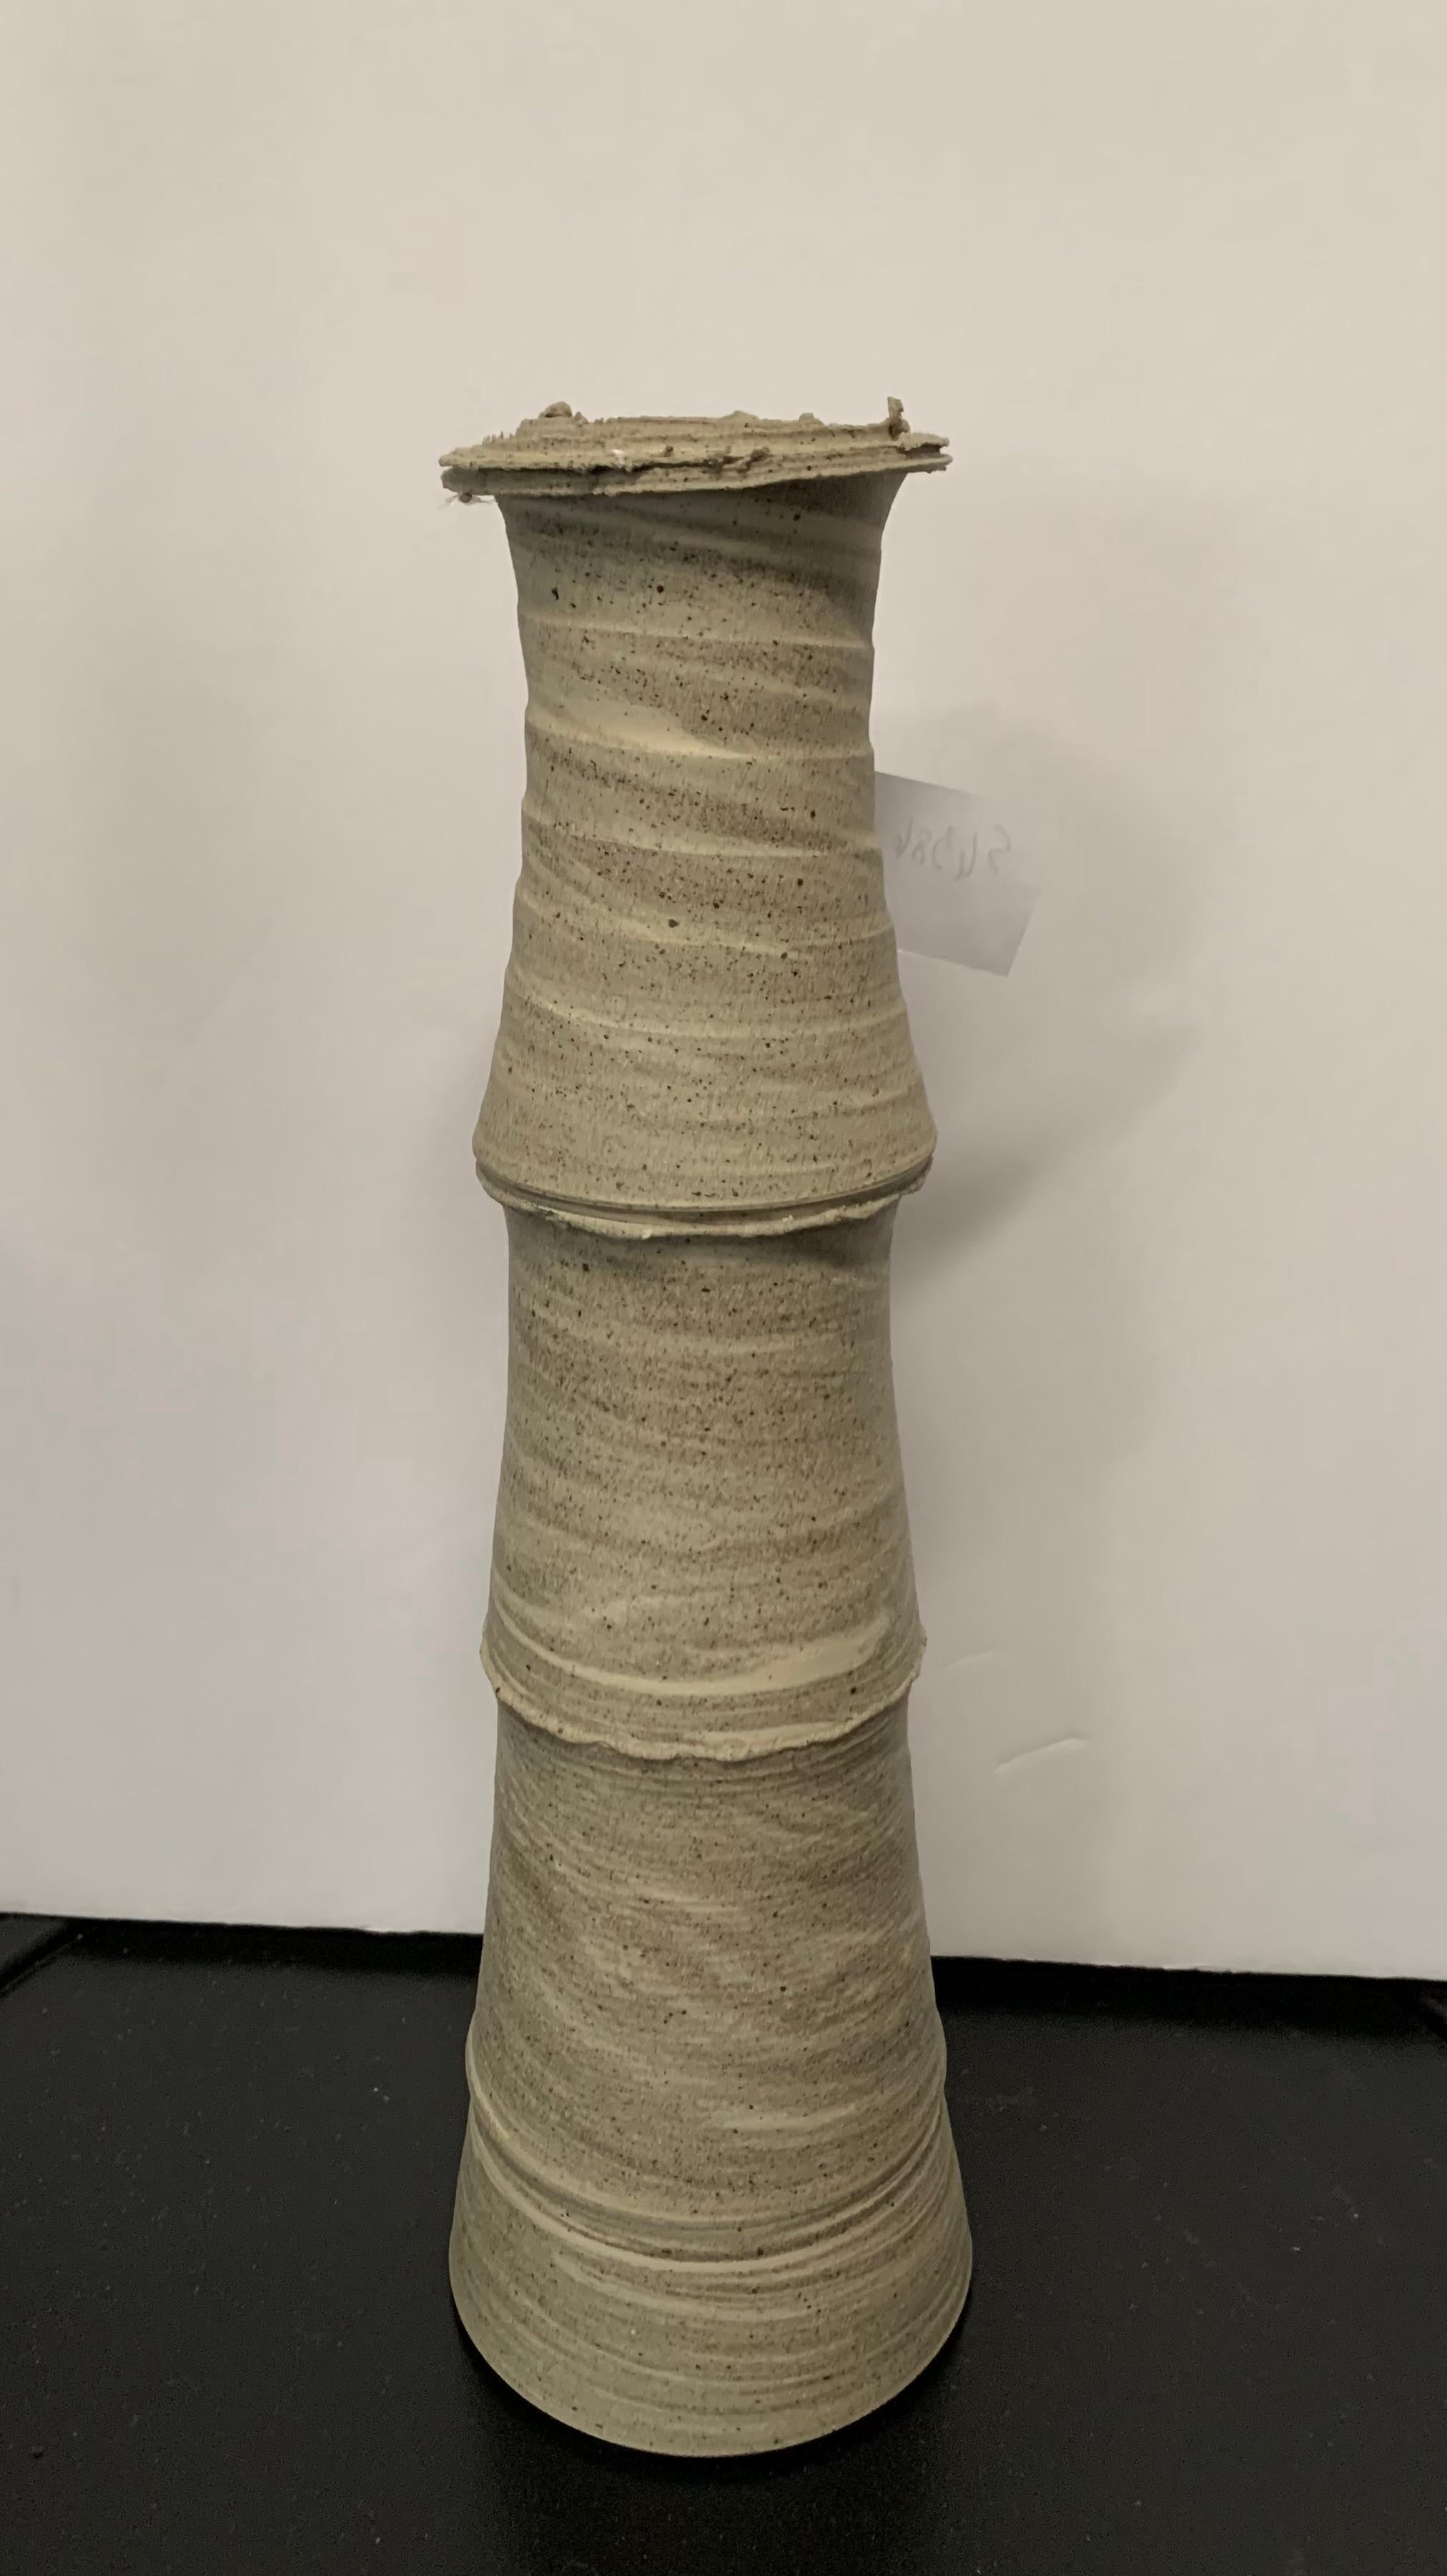 Contemporary German handmade stoneware vase.
Vertebrae design.
Sand color and basalt stoneware.
Small lip opening.
Part of a large collection of handmade vases of different sizes, shapes and textures.